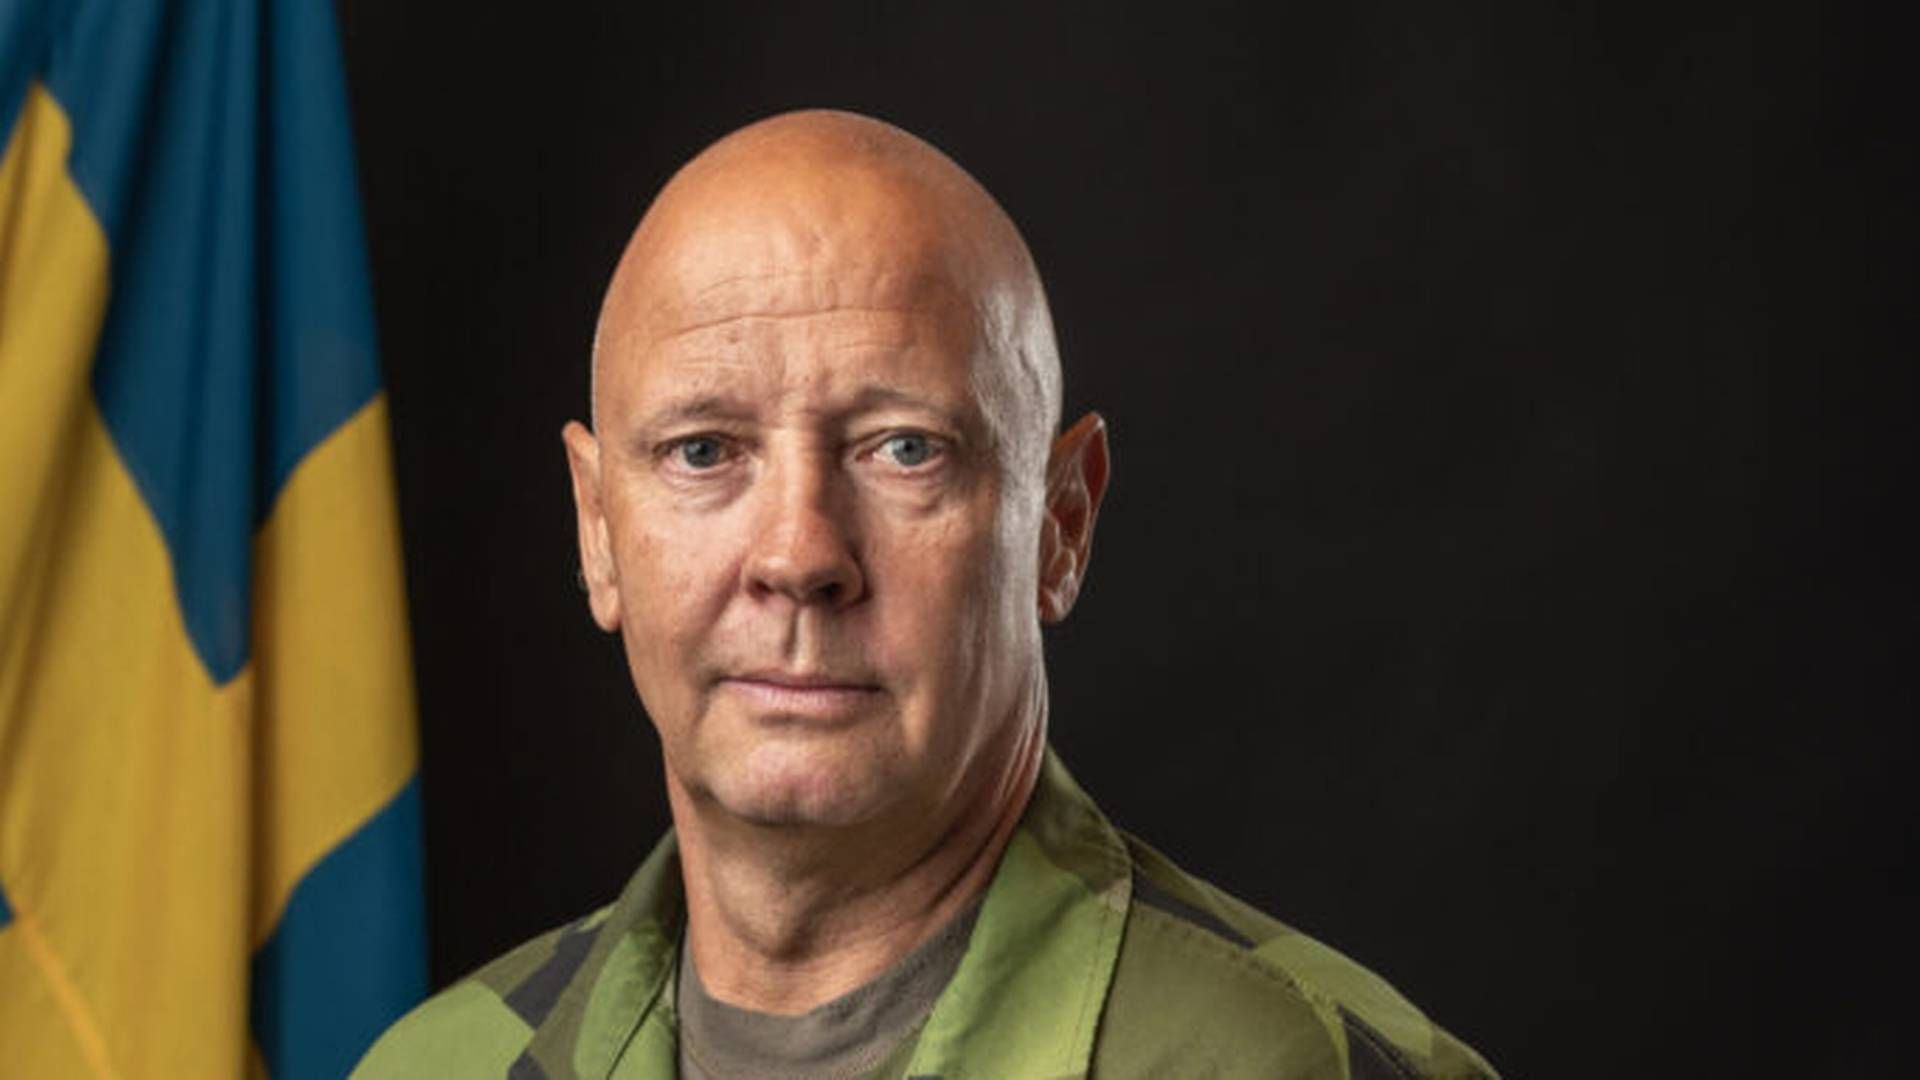 Major General Karl Engelbrektson, the former Swedish army chief, is head of the fund's advisory board. | Photo: Finserve Nordic / PR